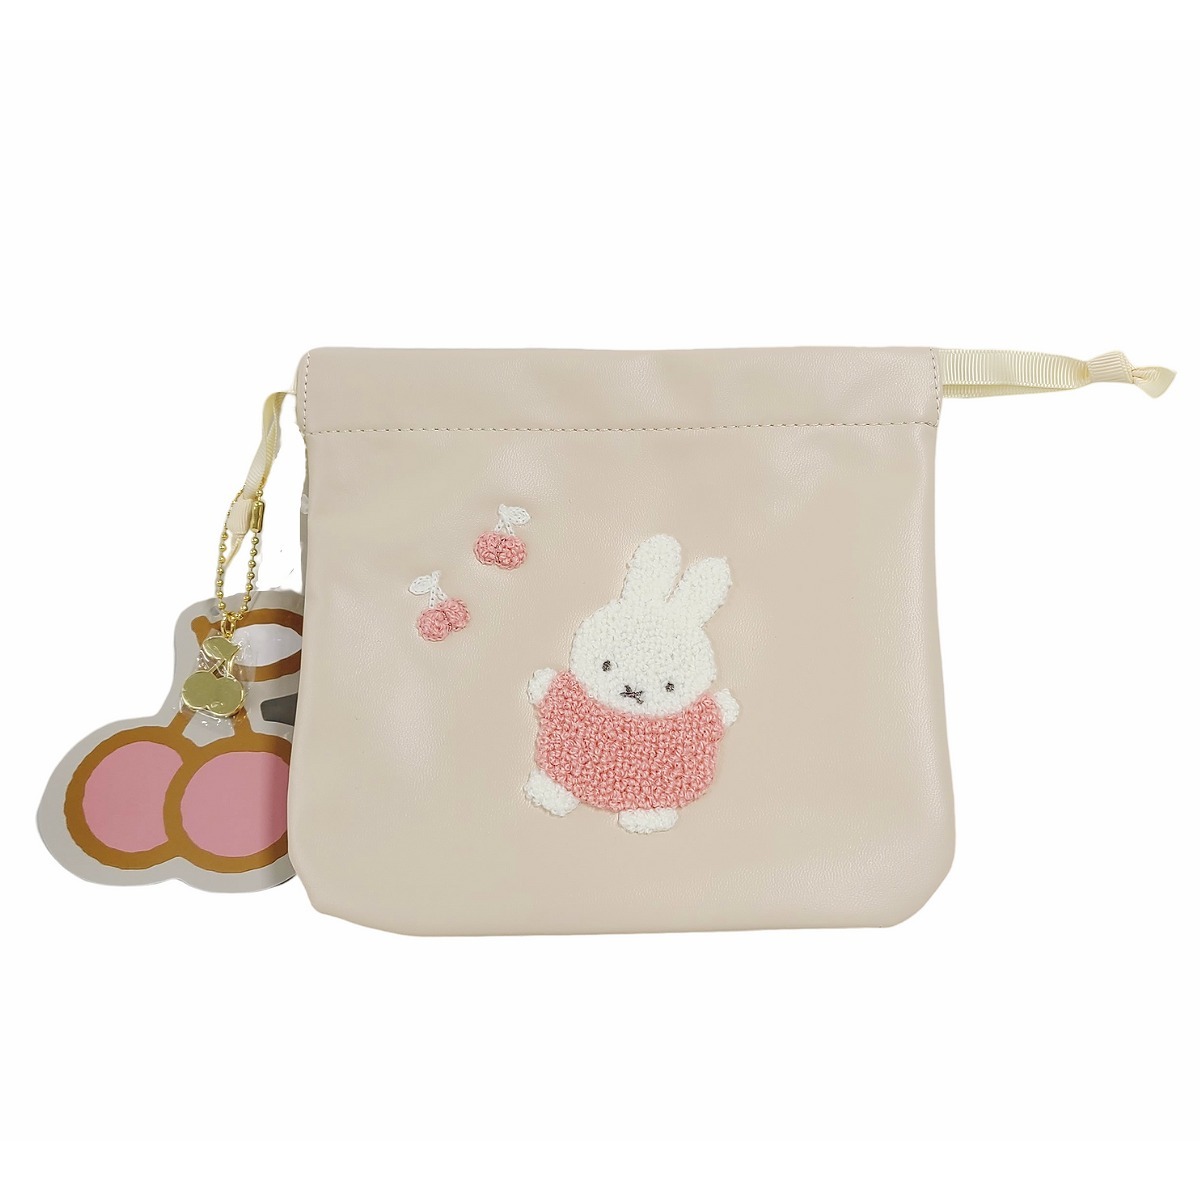 MF pouch pouch Miffy . beautiful . Dick bruna cherry SaGa la embroidery case pouch pouch 